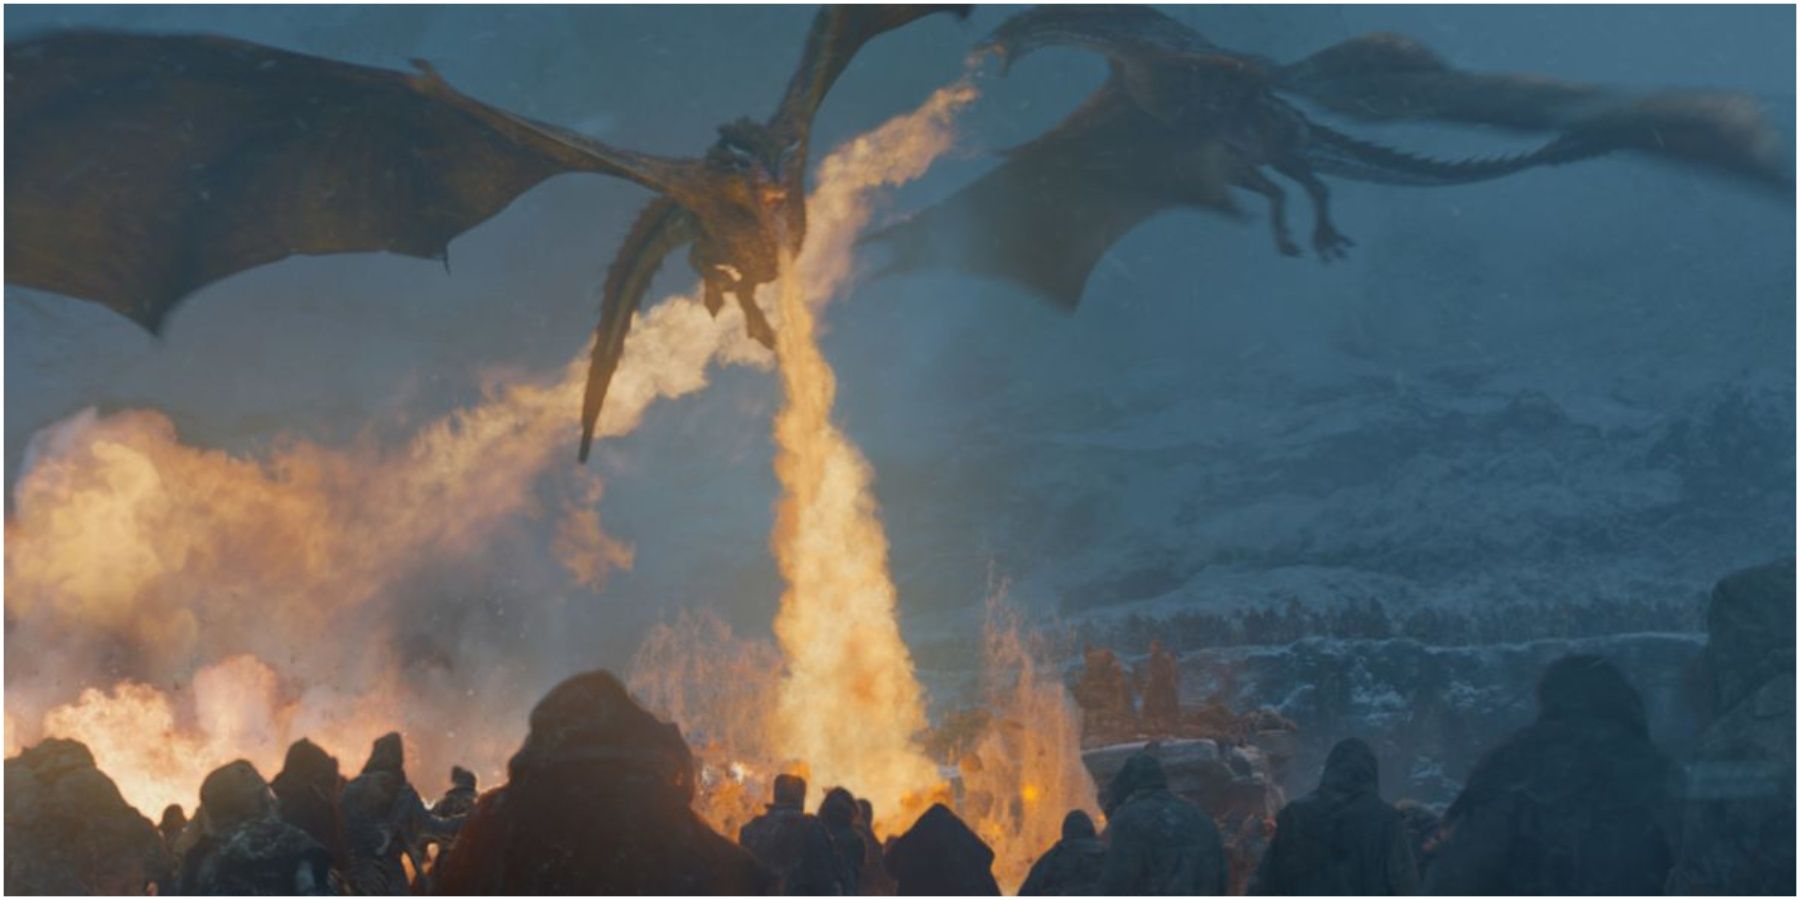 Daenerys' dragons set fire to Wights Beyond the Wall in Game of Thrones.